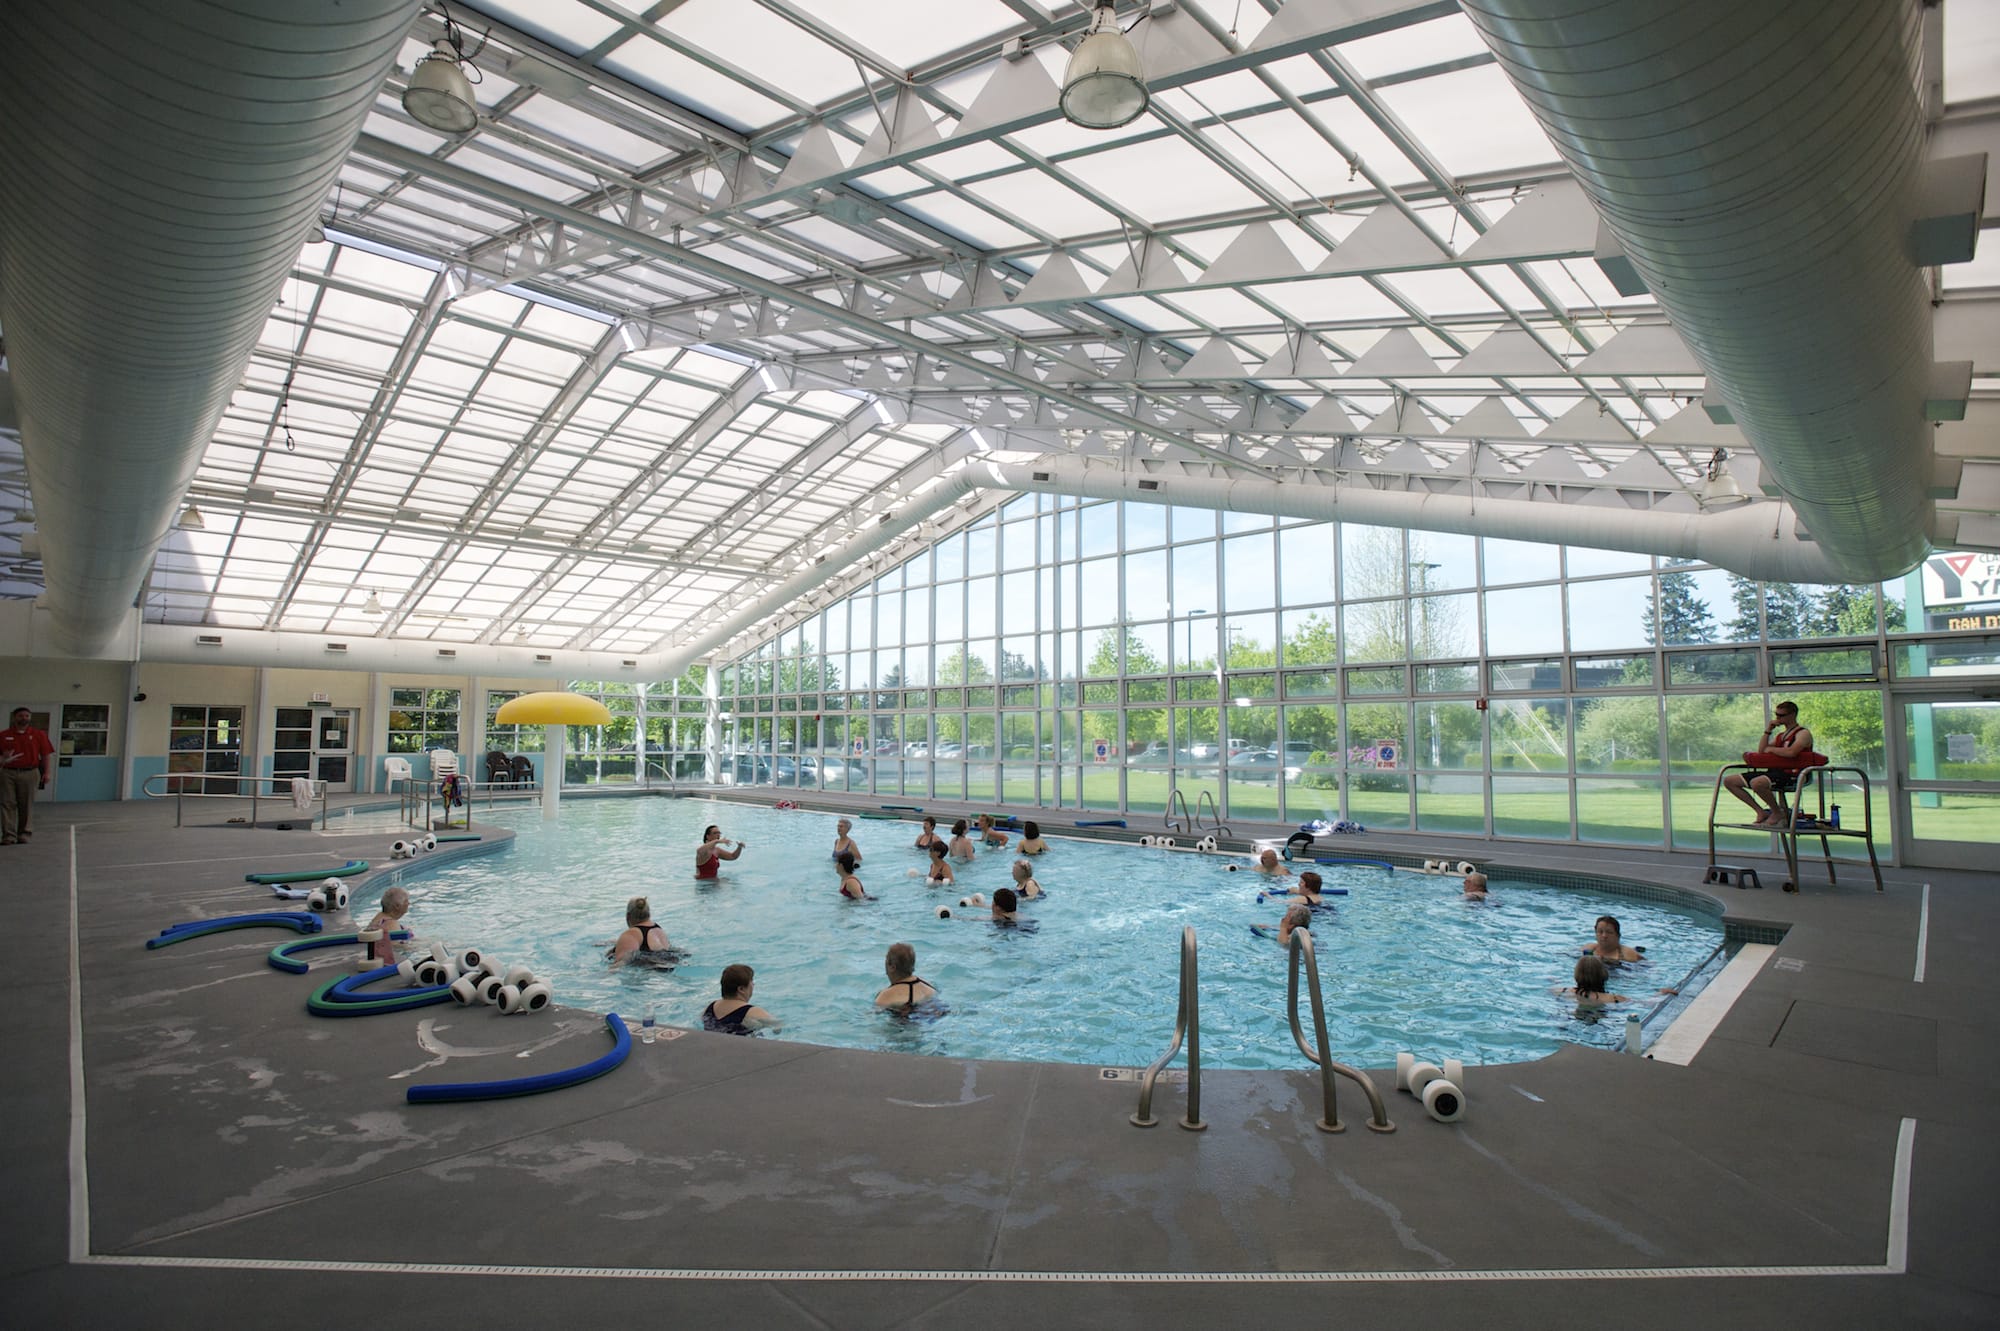 The pool at the Clark County Family YMCA, shown on Monday, will remain, and a new six-lane lap pool will be added as part of an upcoming remodel.